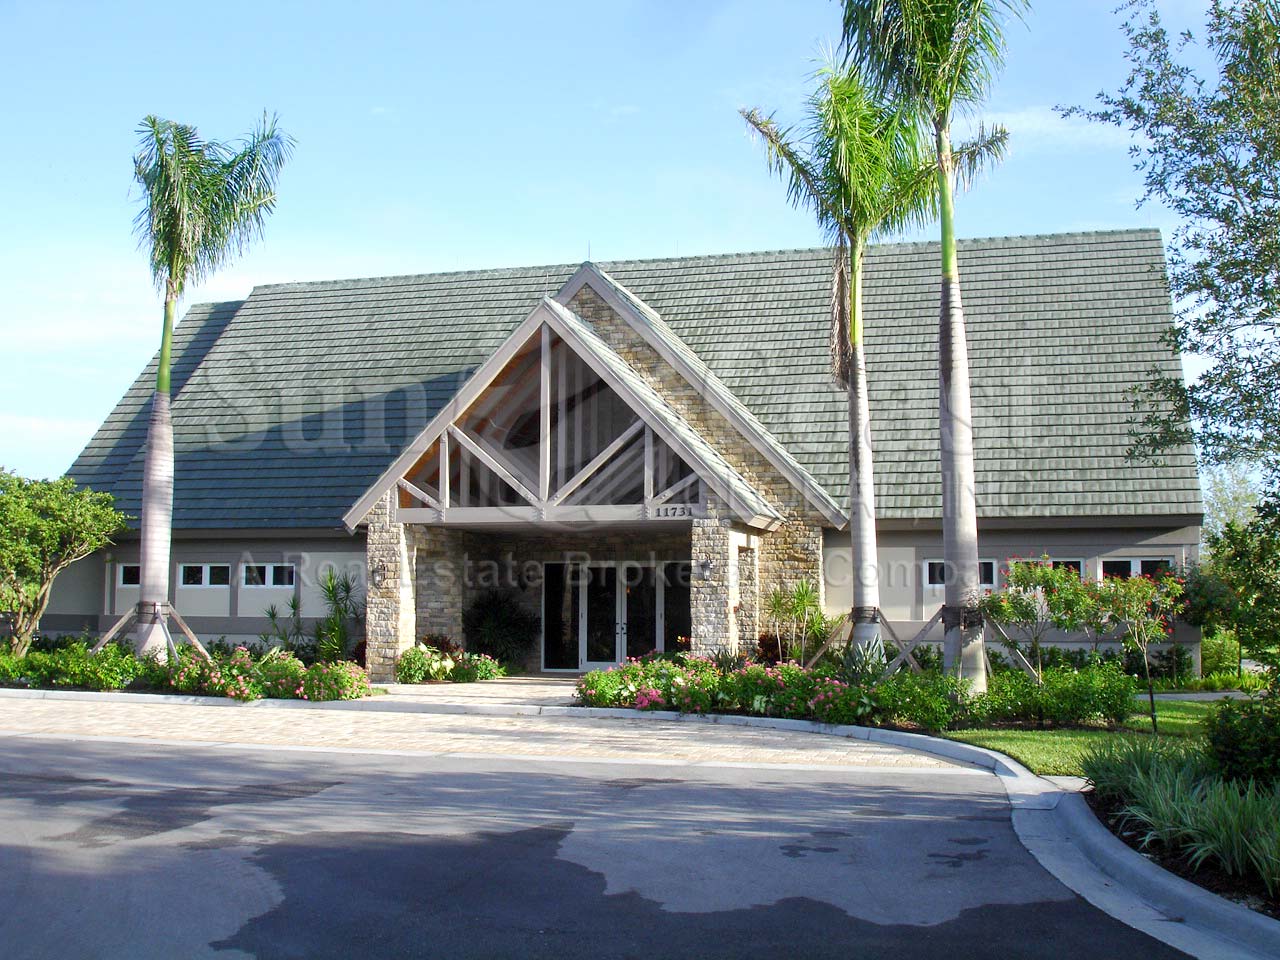 TWIN EAGLES fitness center and pool